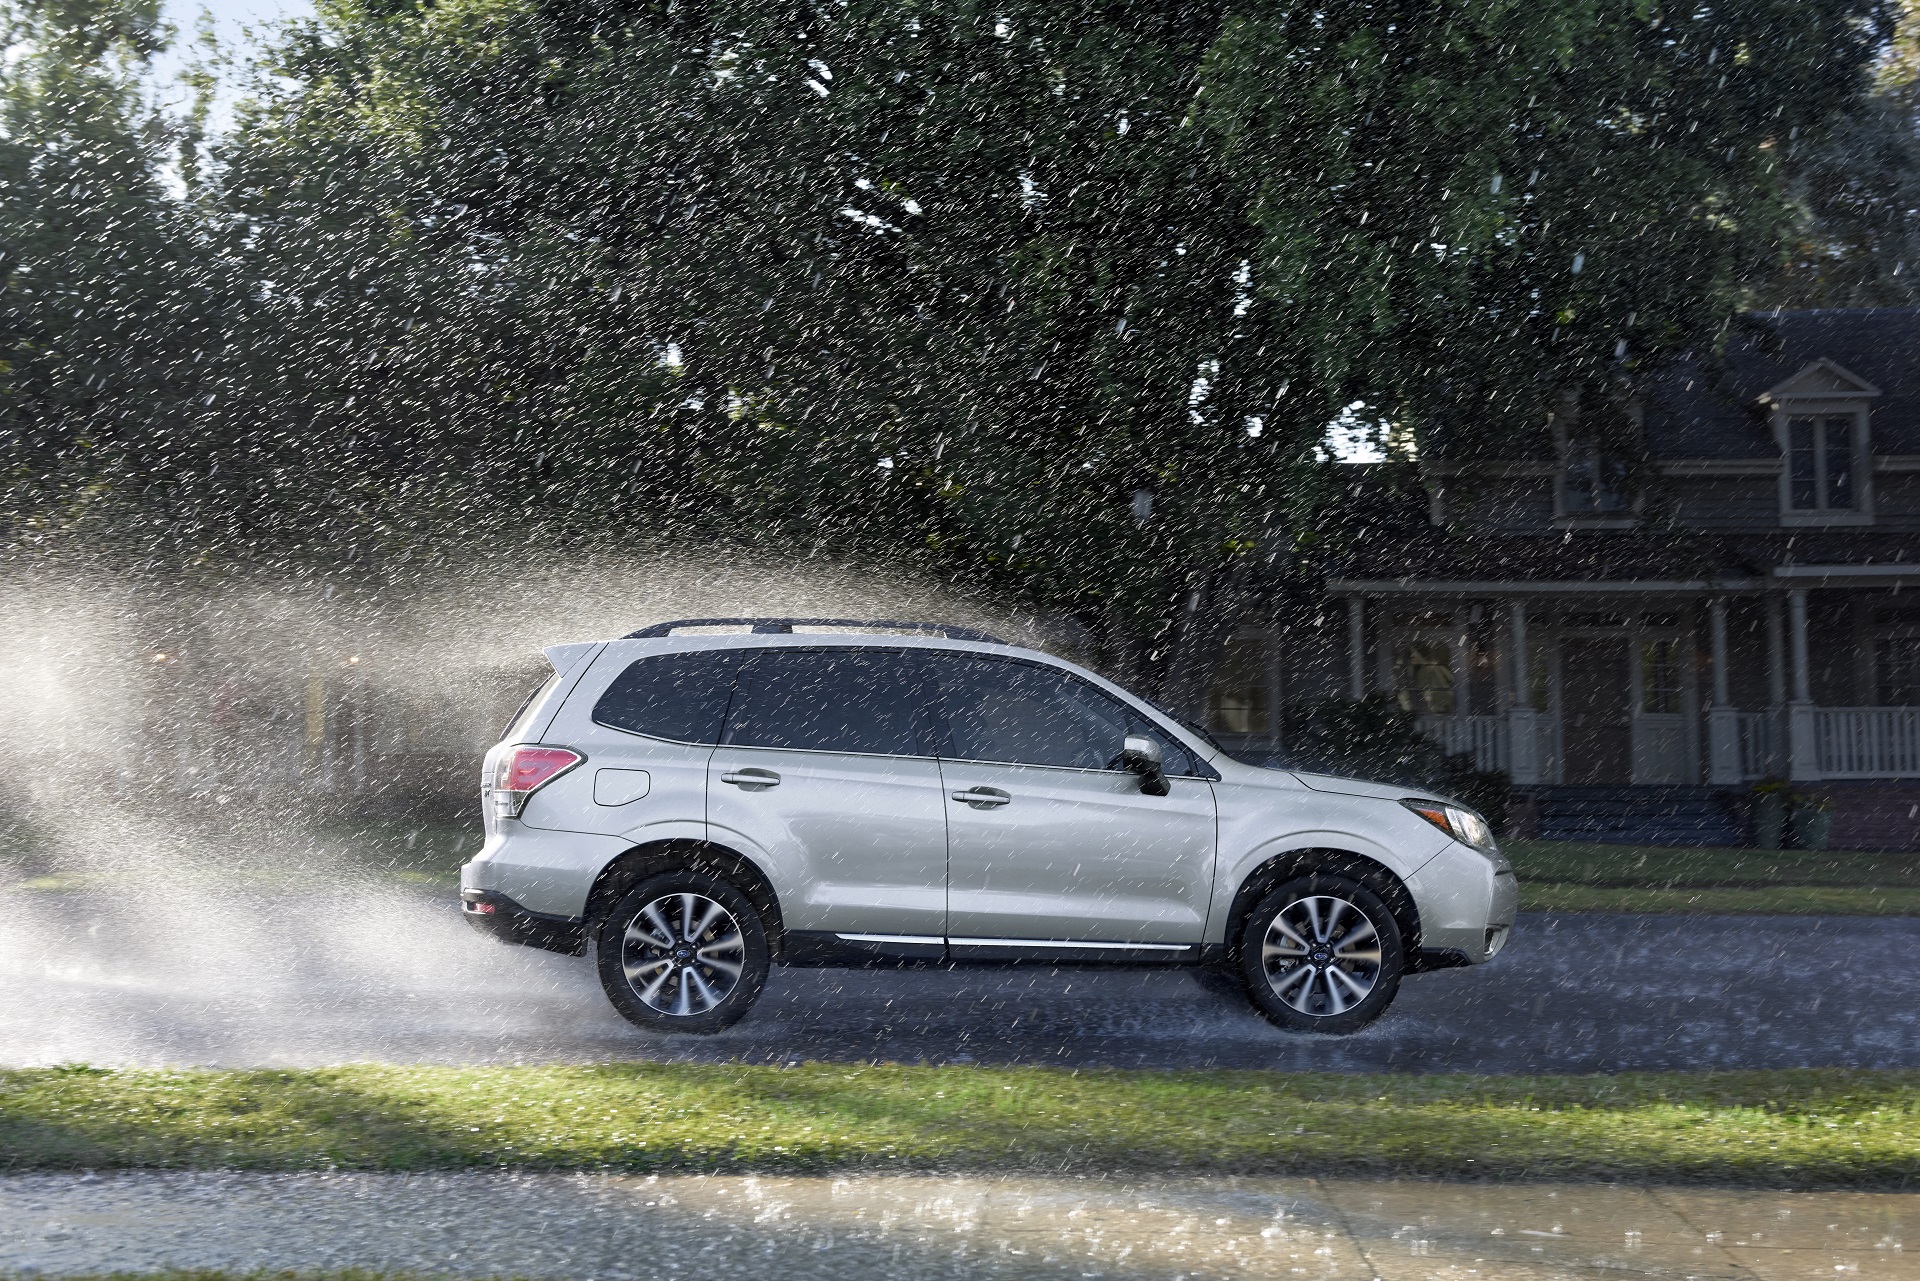 2018 Subaru Forester prices and expert review - The Car Connection